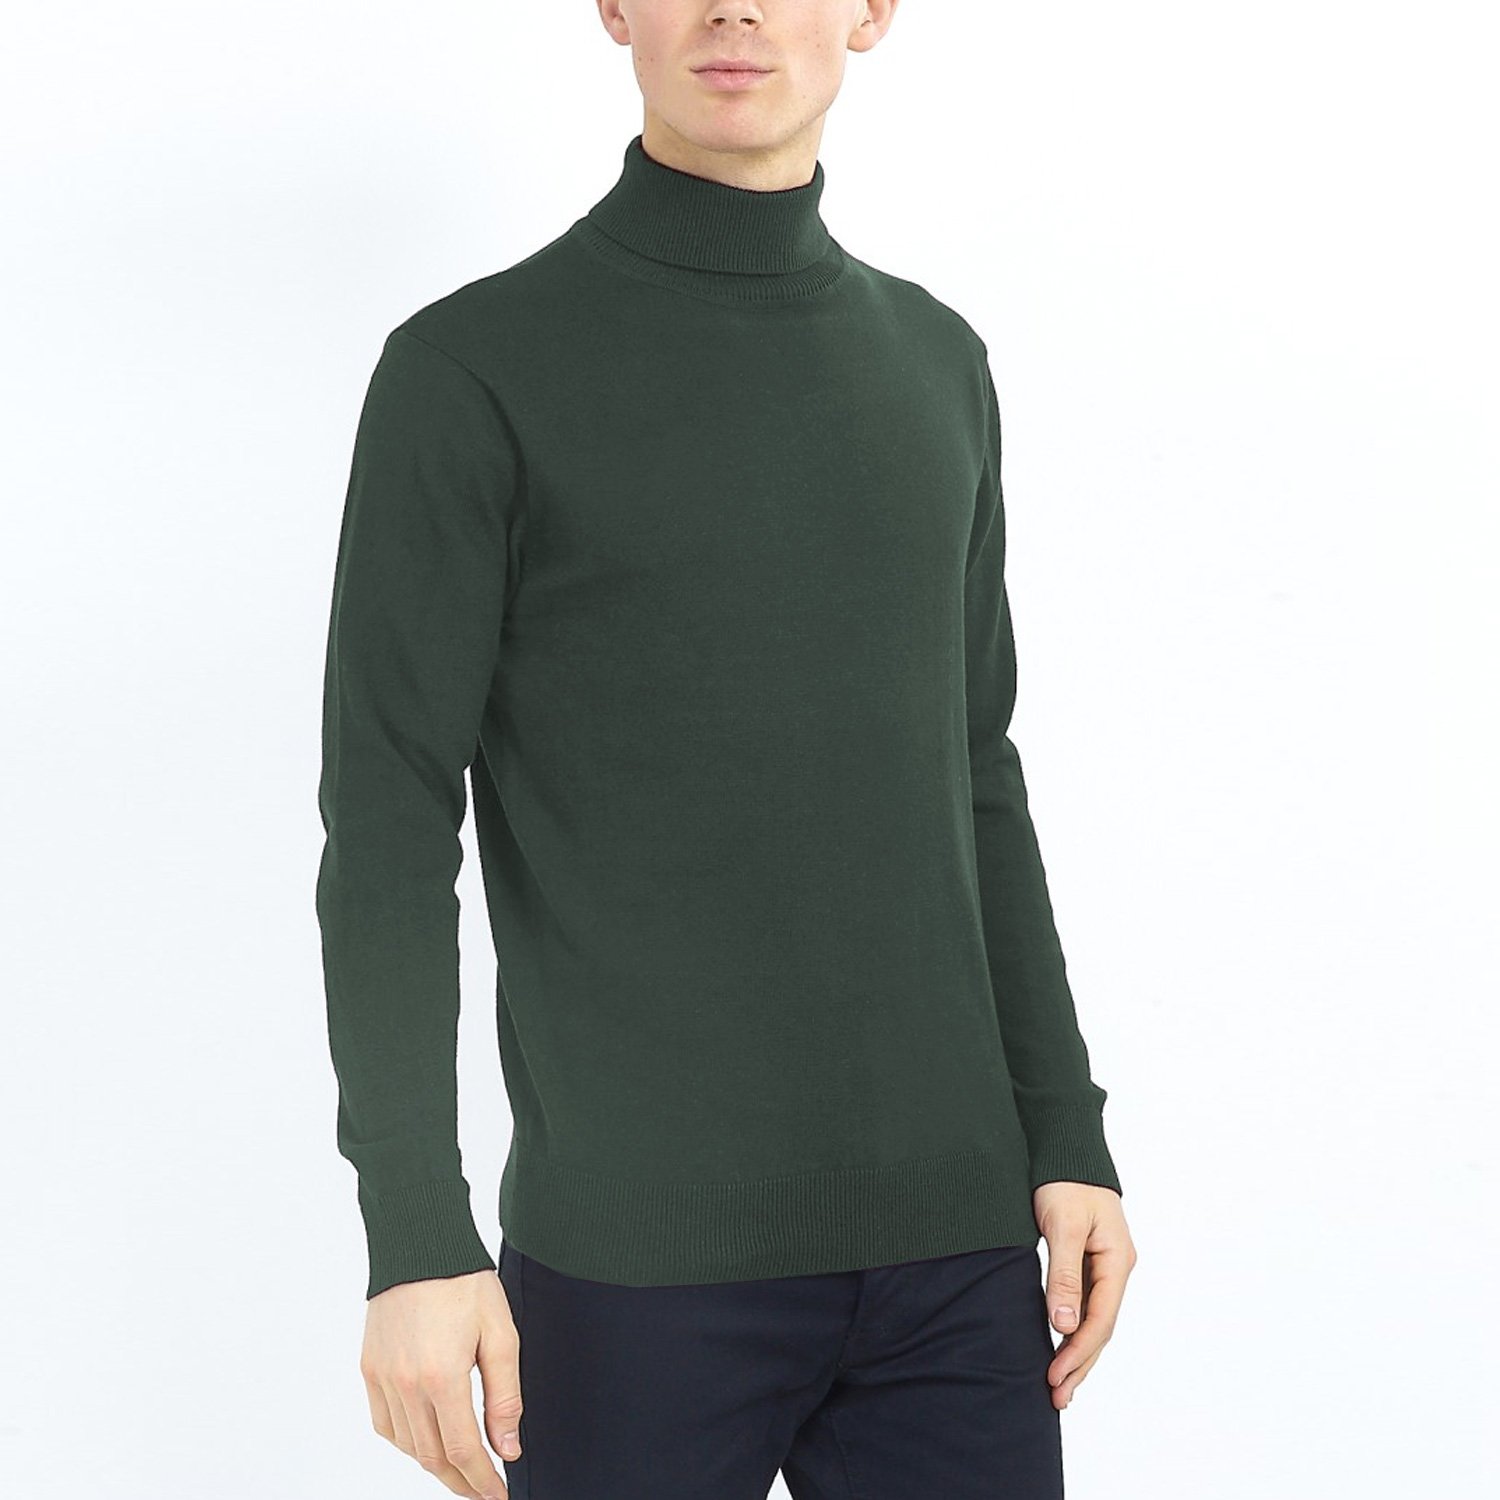 AARHONS Mens Roll Polo Neck Jumper Brave Soul  Pull Over Sweater Top S-XLHUME 